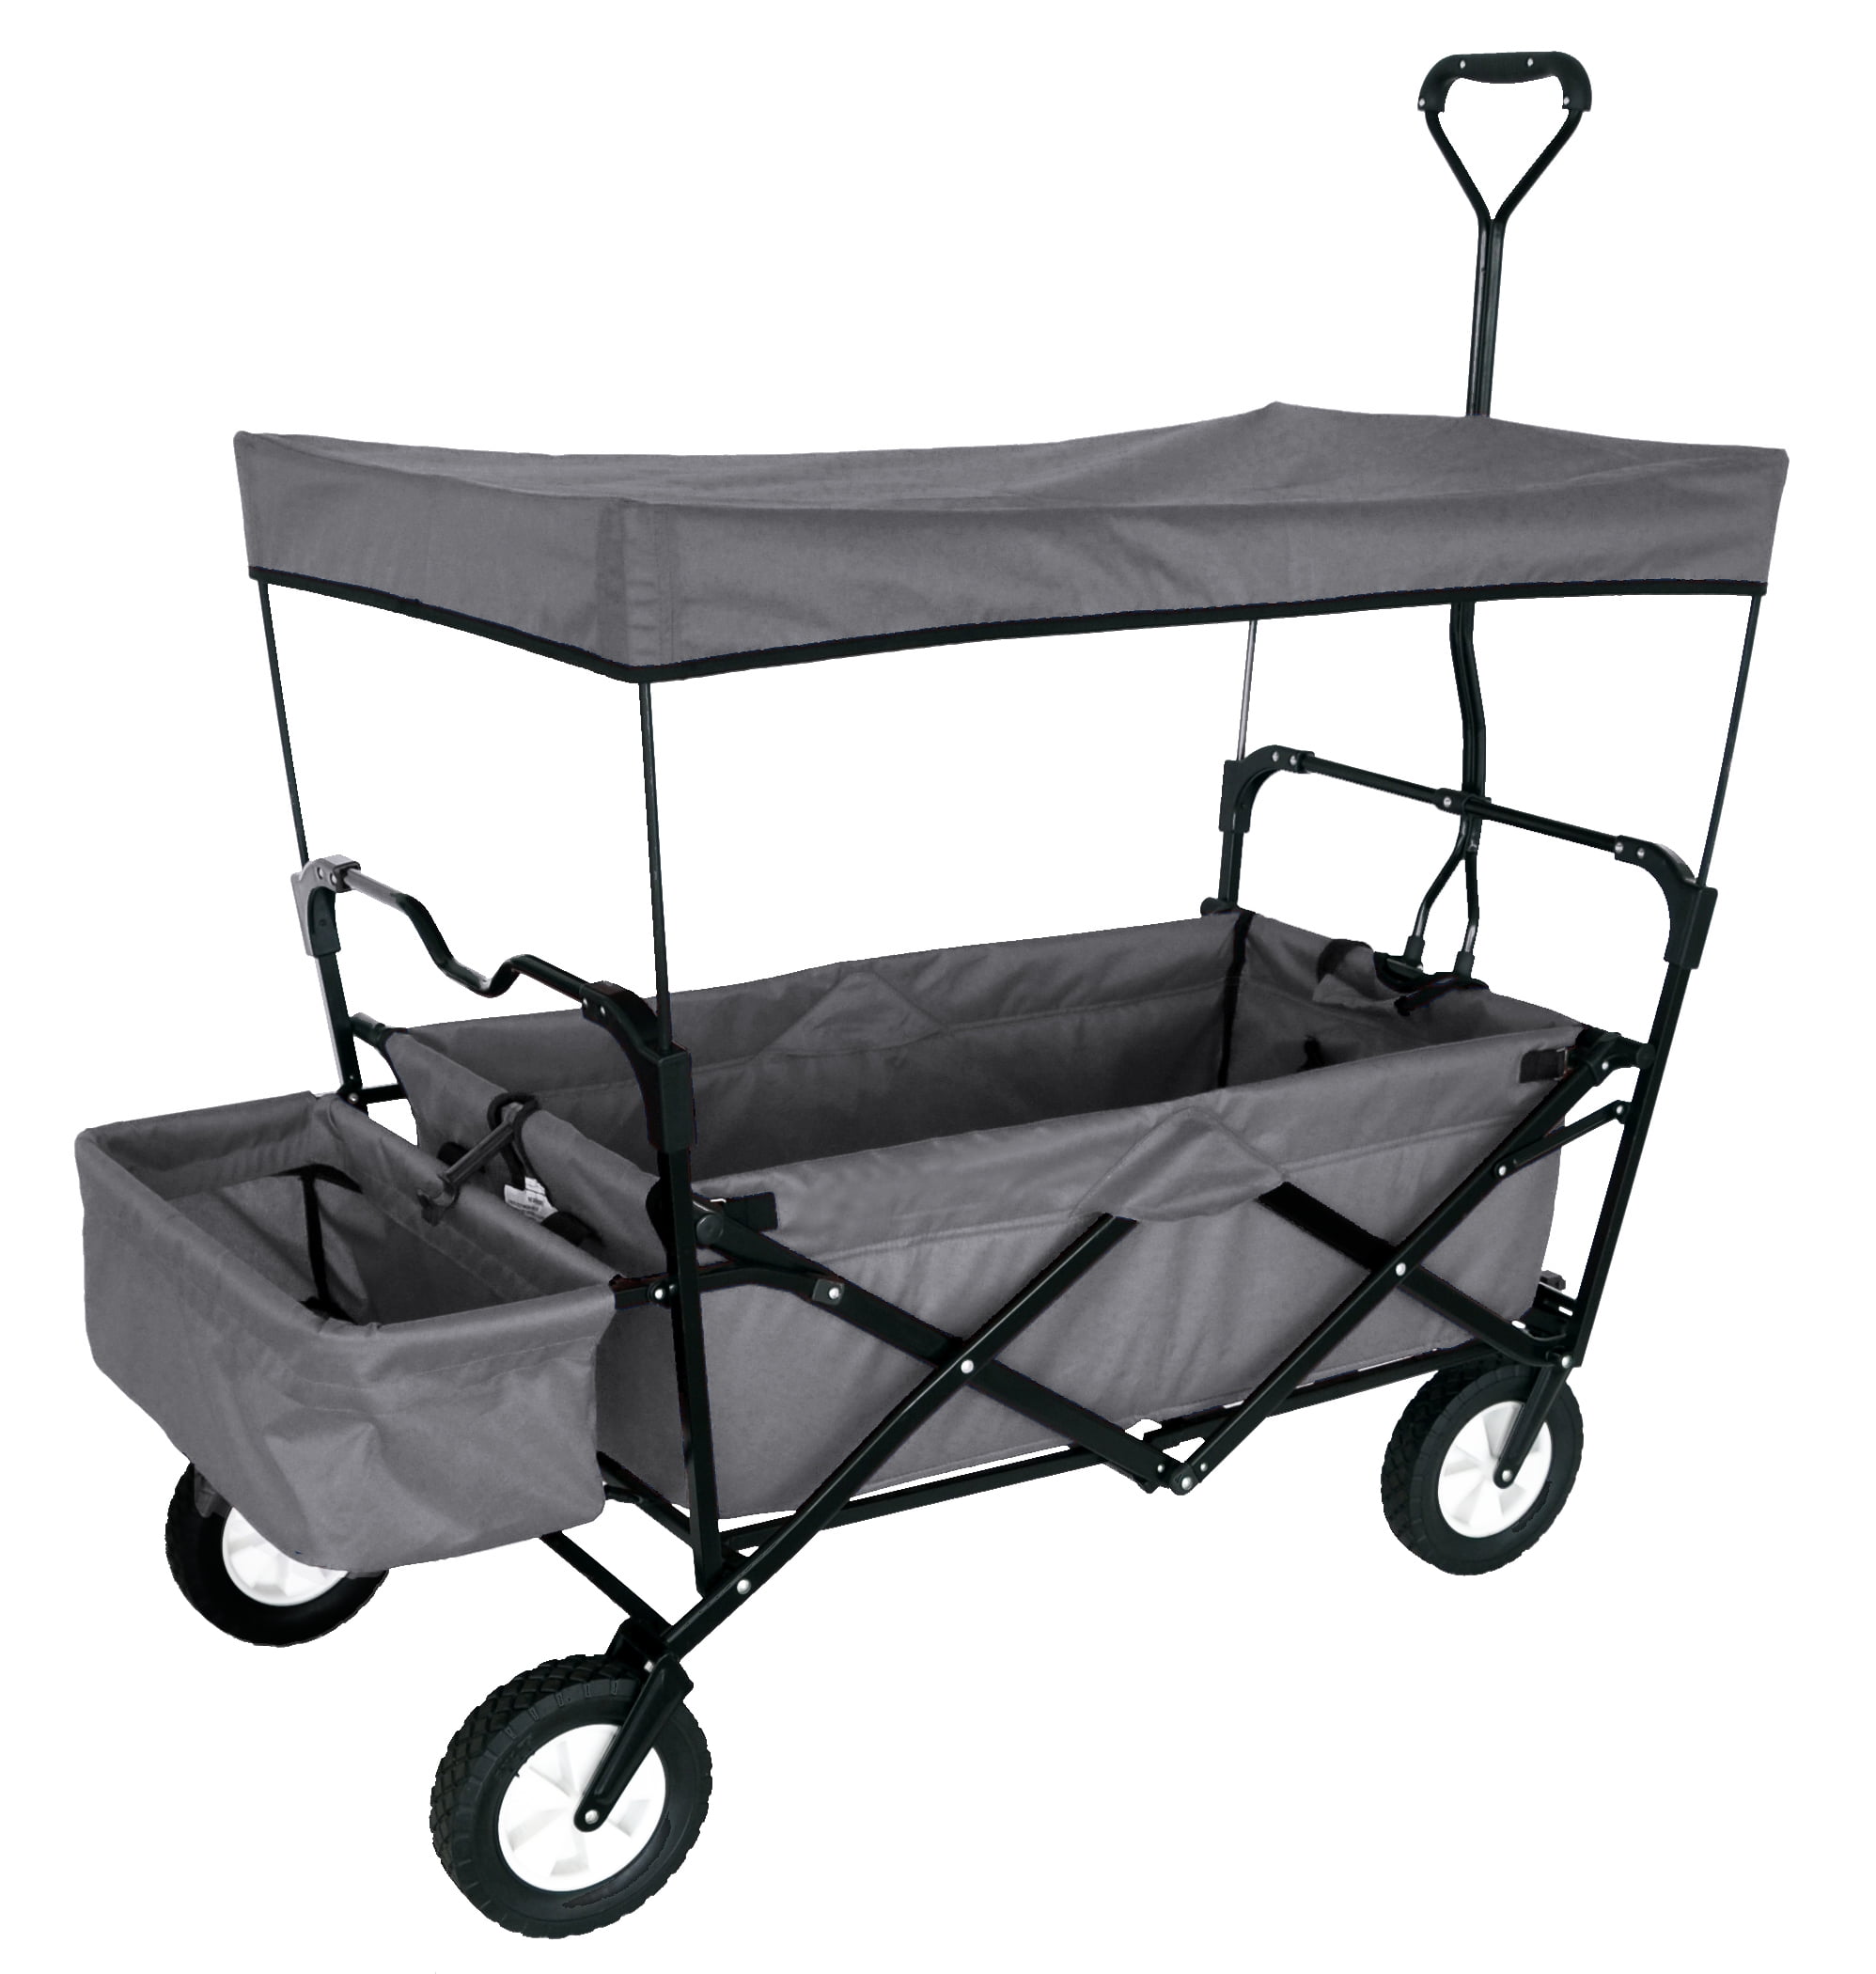 Toddler Wagons With Canopies | The Wagon